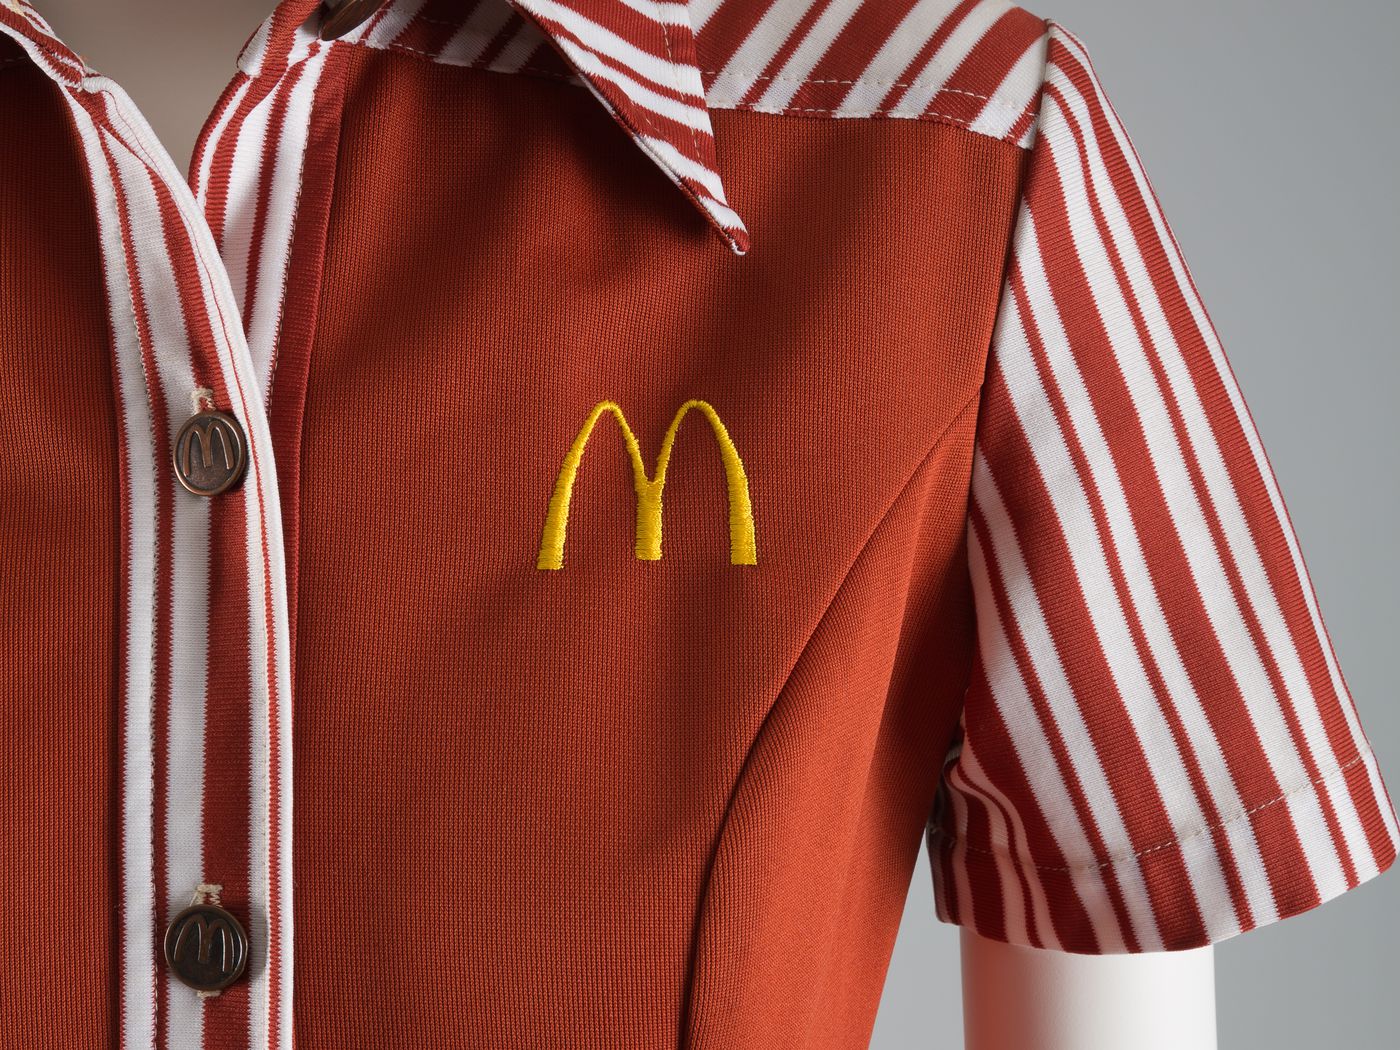 McDonald’s Dress Code: Everything You Need to Know